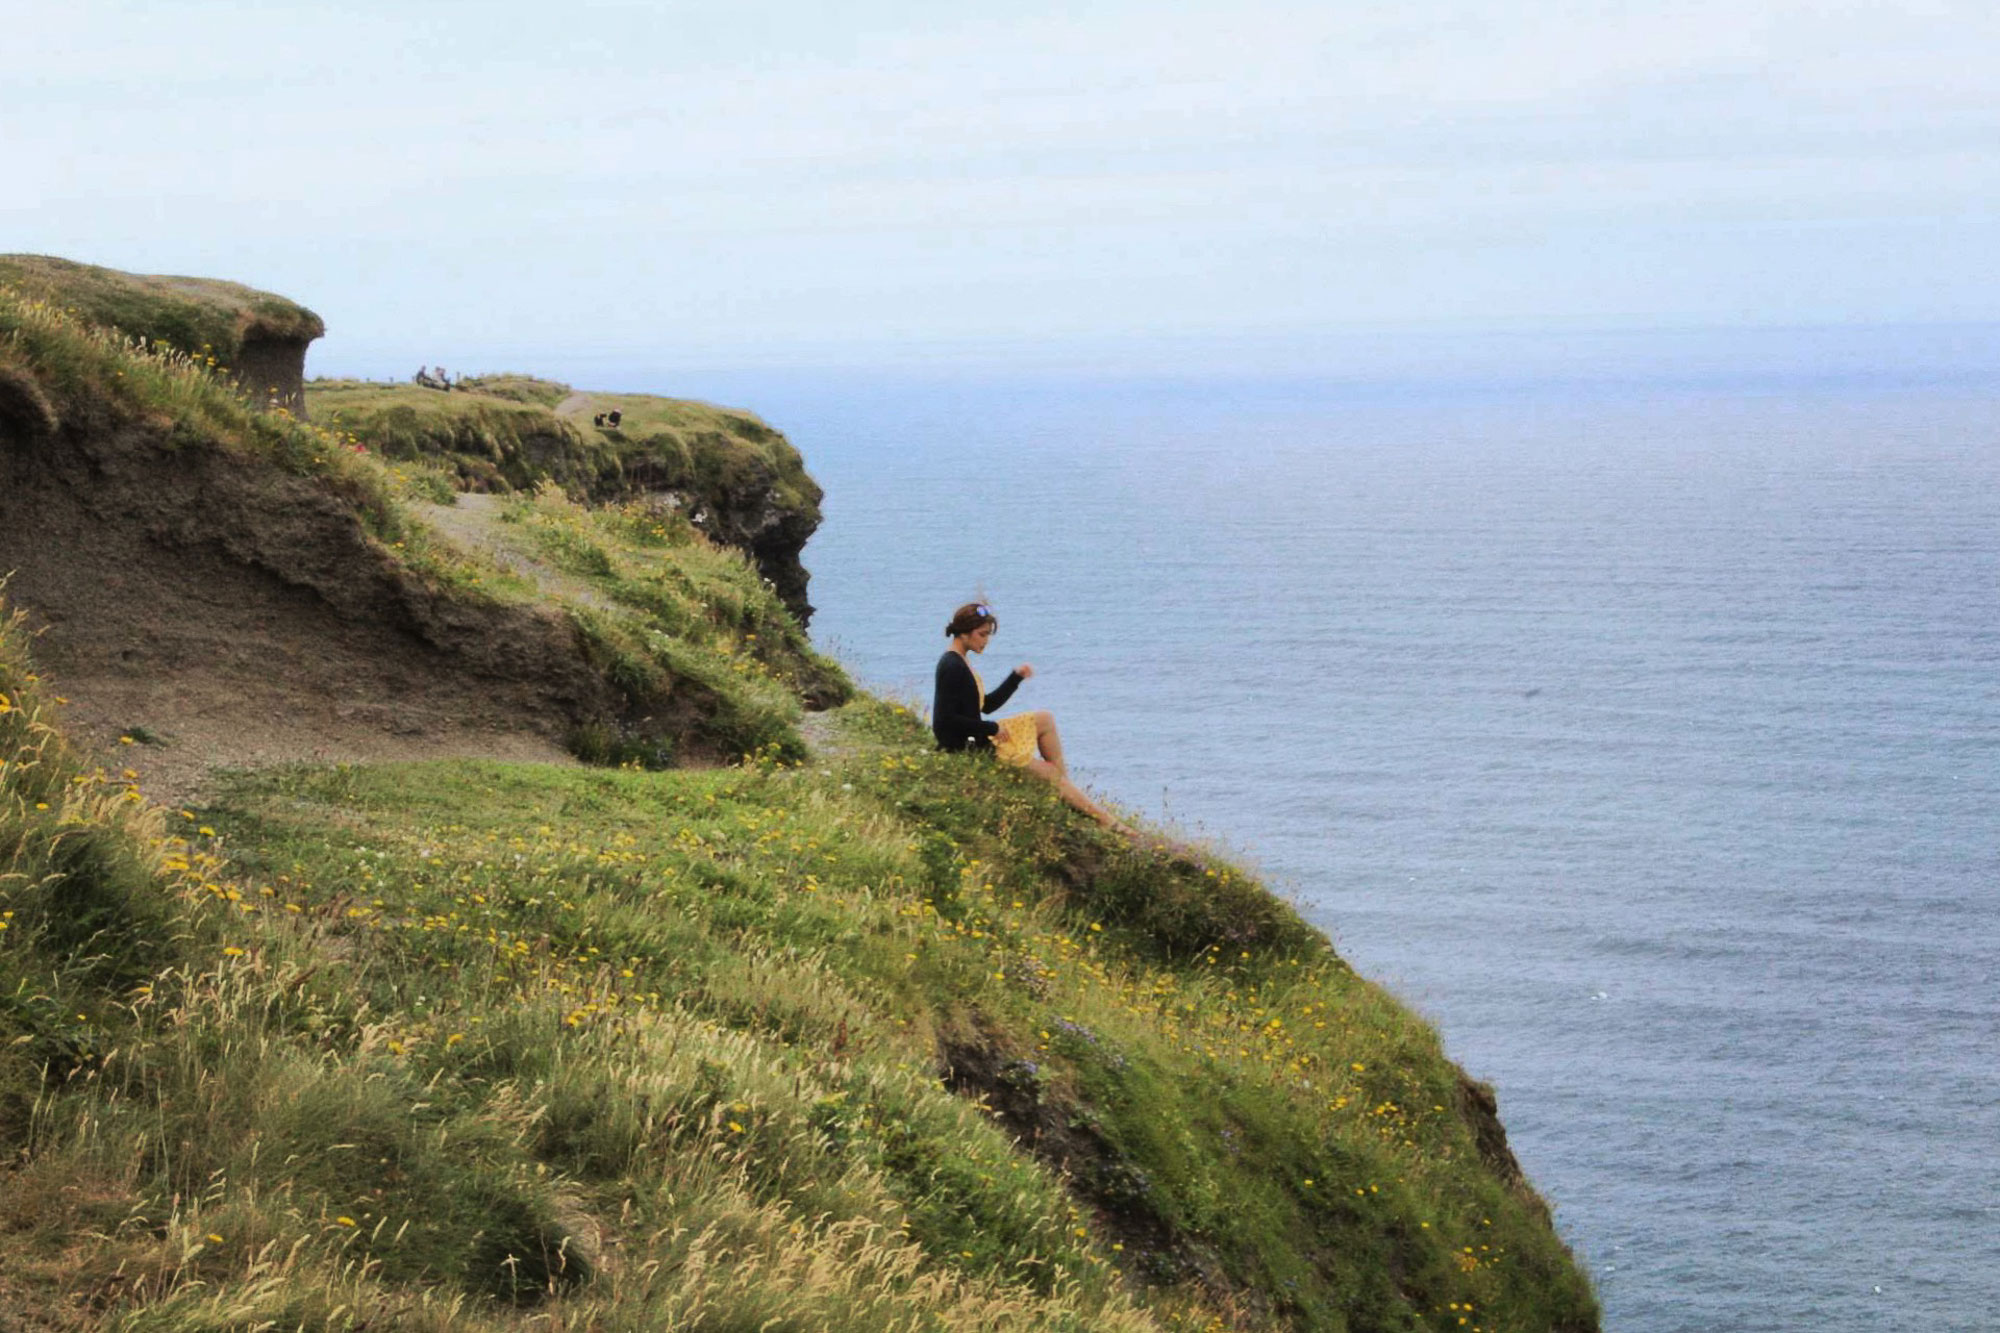 Friend gazing at the sea at the Cliffs of Moher